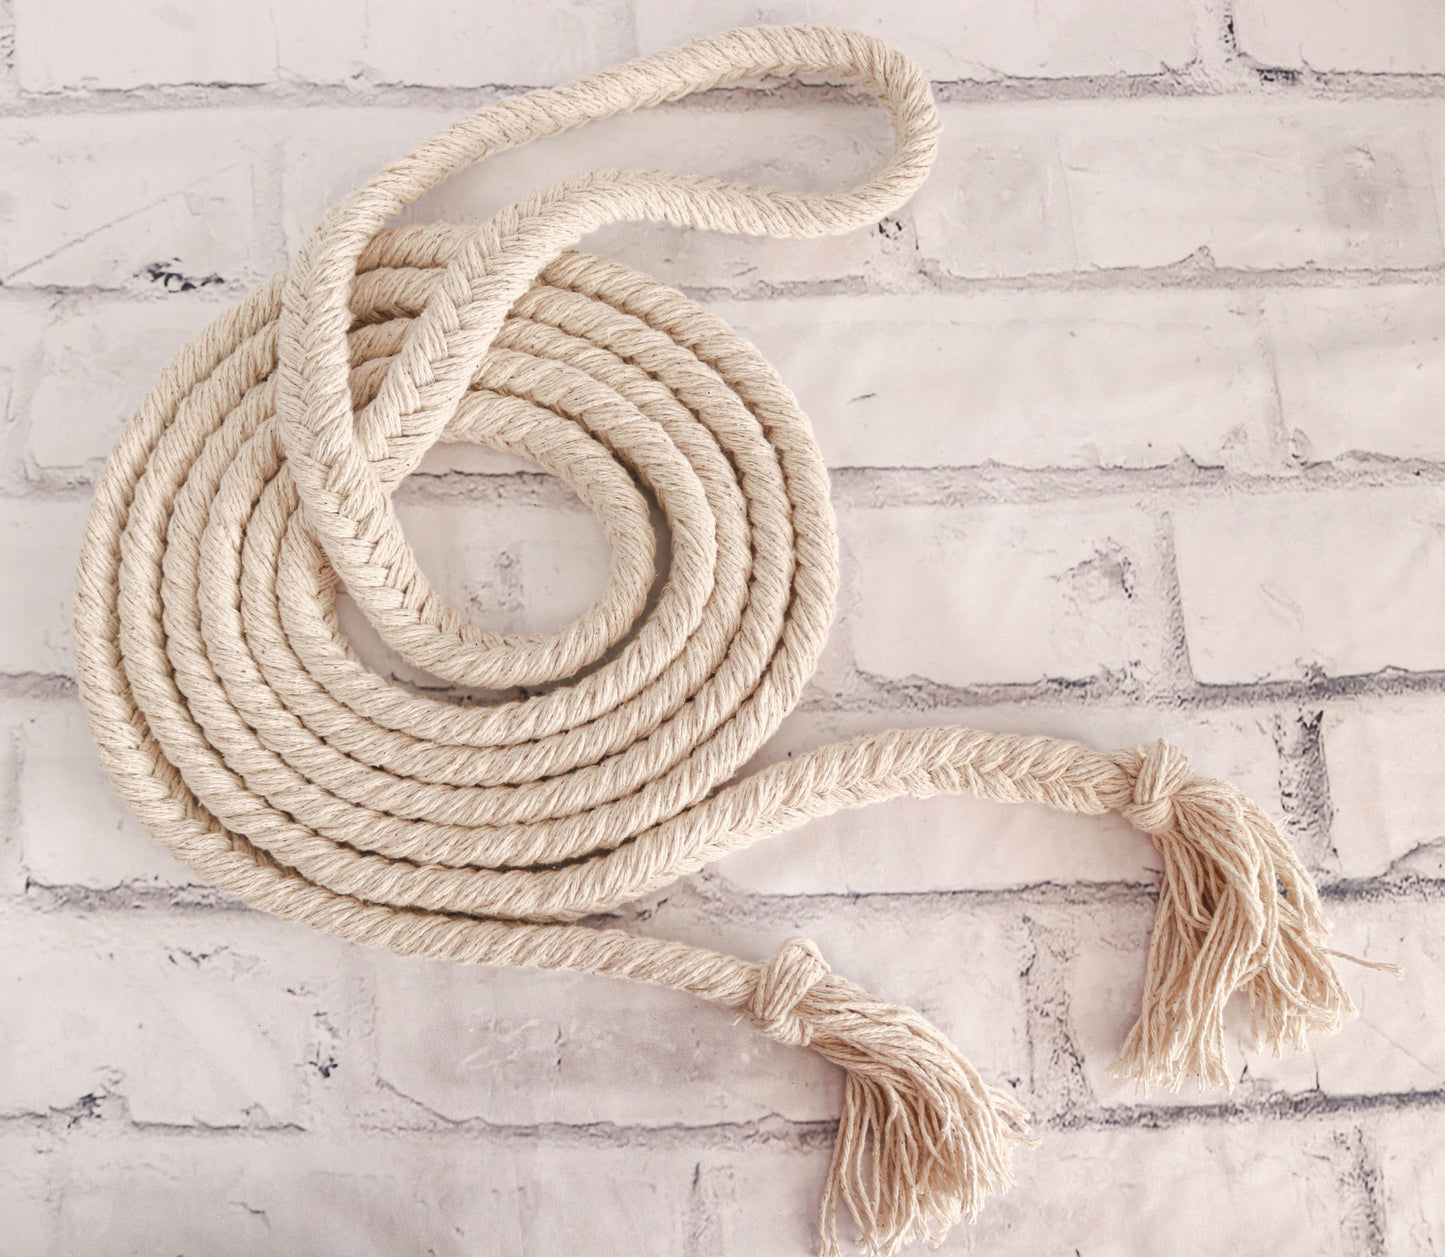 14 Ft. Braided 3 Strand Natural Cotton Soft Thick Heavy Breaking Reins